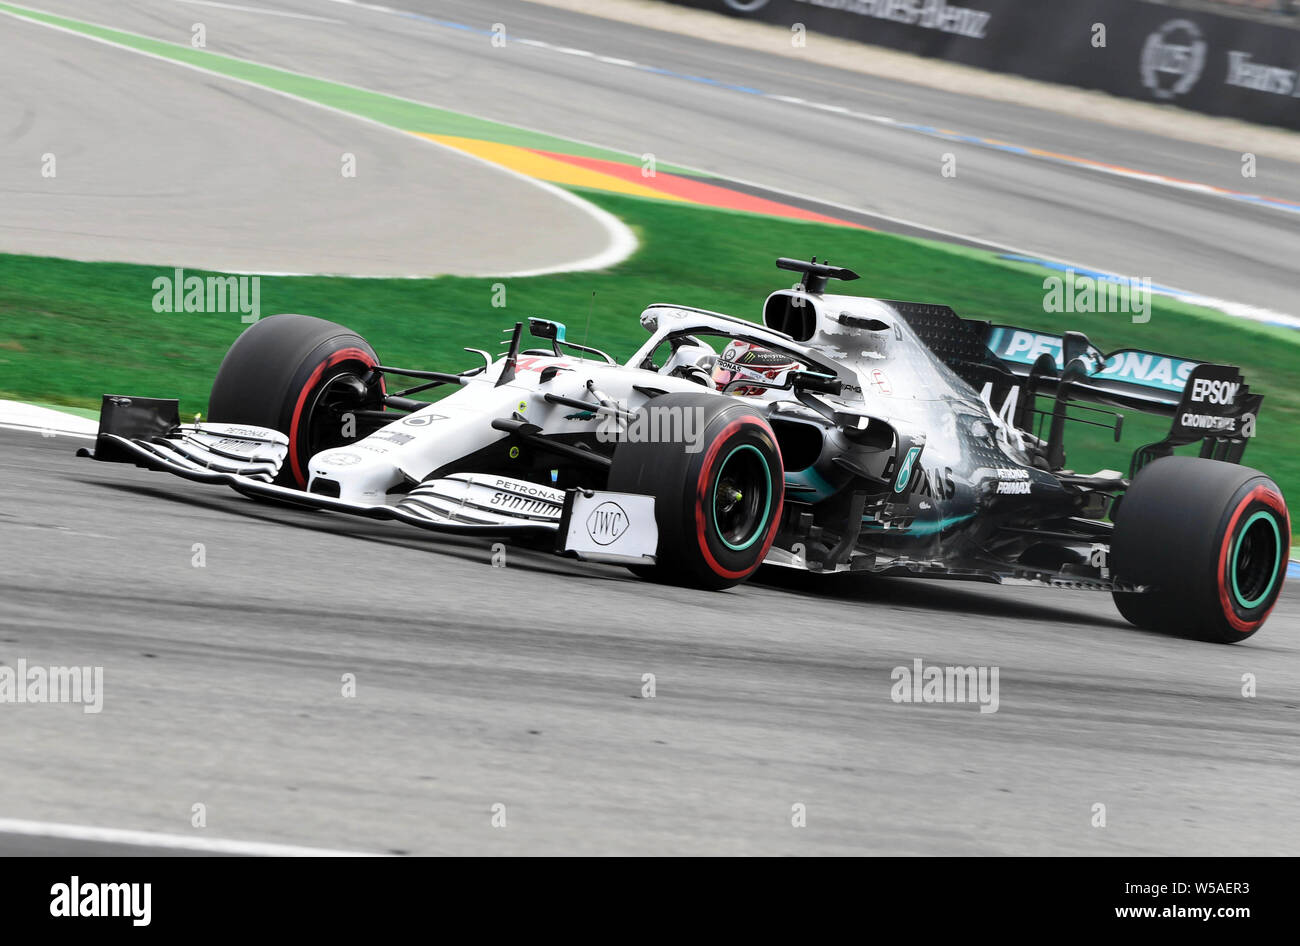 Hockenheim, Germany. 27th July, 2019. Motorsport: Formula 1 World Championship, Grand Prix of Germany. Lewis Hamilton from Great Britain of the Mercedes-AMG Petronas team drives on the race track during the third free practice session. Credit: Uli Deck/dpa/Alamy Live News Stock Photo